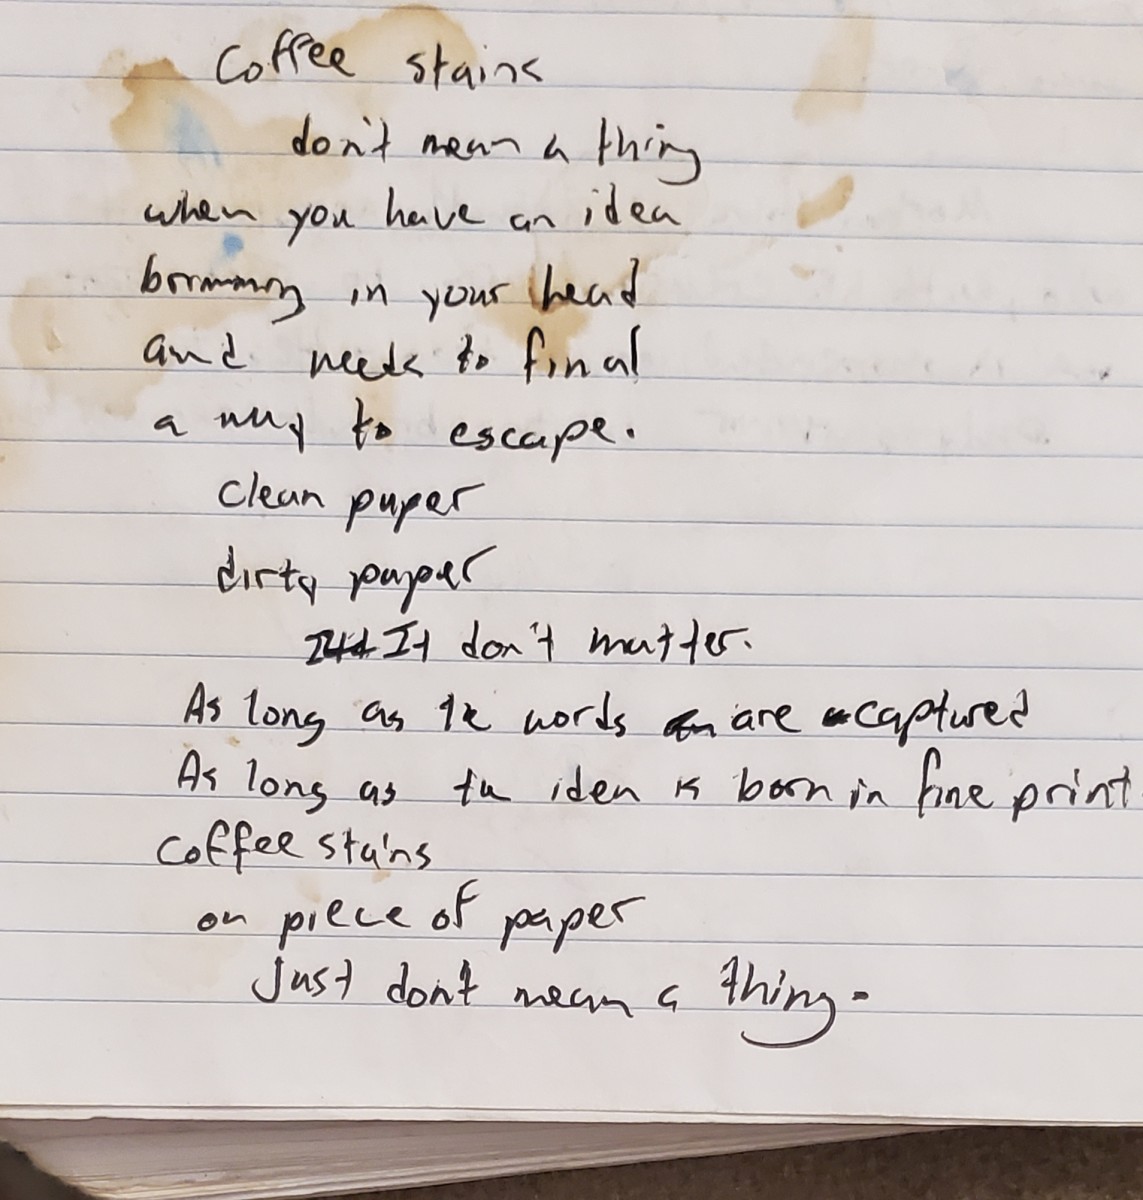 original draft....with the coffee stain. 